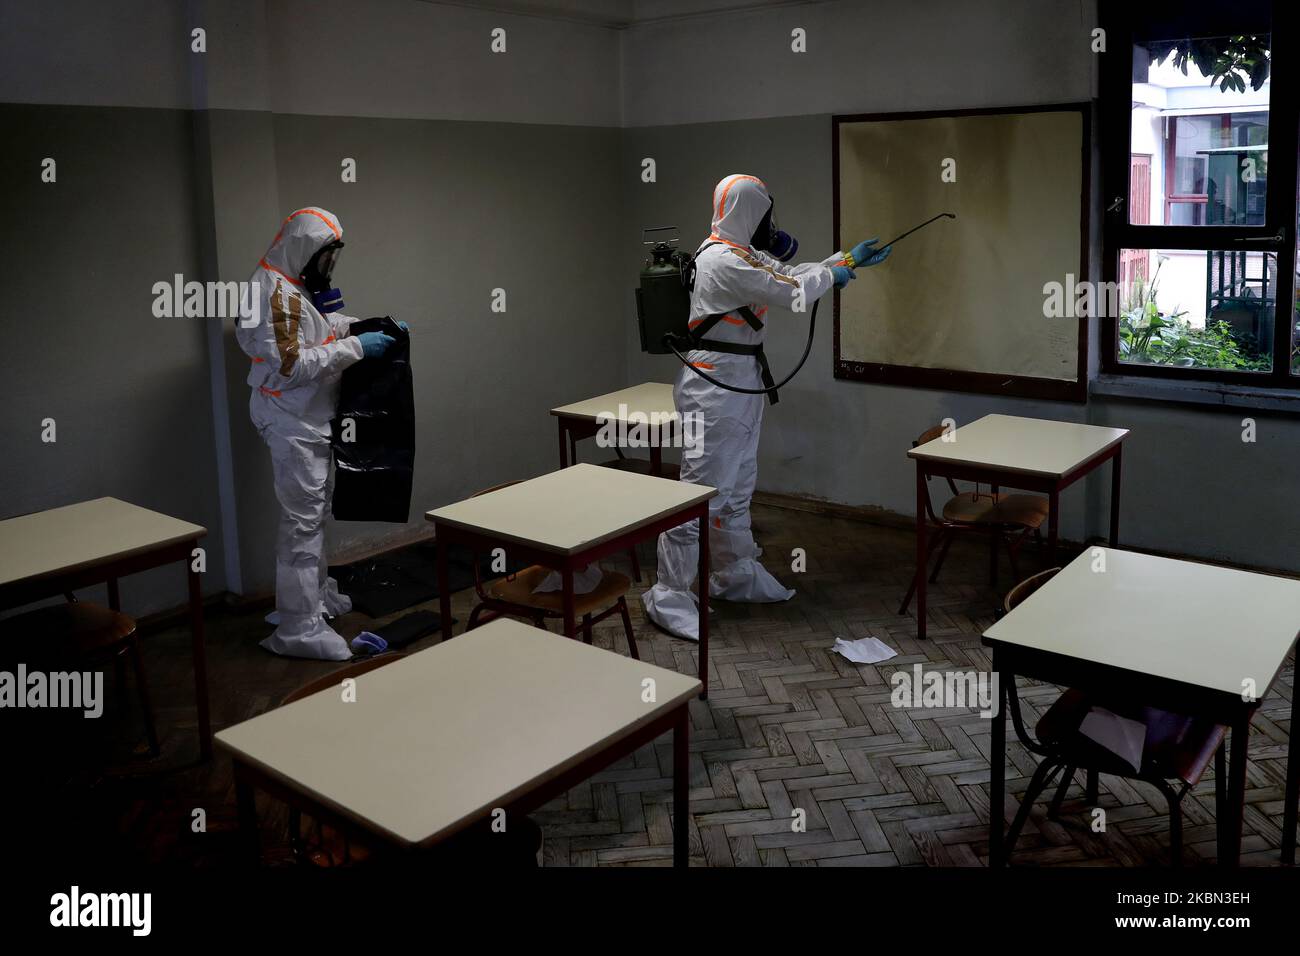 Portuguese Soldiers wearing protective gear disinfect a high school as the spread of the COVID-19 coronavirus disease continues, in Lisbon, Portugal on April 29, 2020. As Portugal's state of emergency will end on May 2 and the Government expected to reopen high schools in mid-May, more than 400 members of the country's armed forces are carrying out the disinfection of schools. (Photo by Pedro Fiúza/NurPhoto) Stock Photo